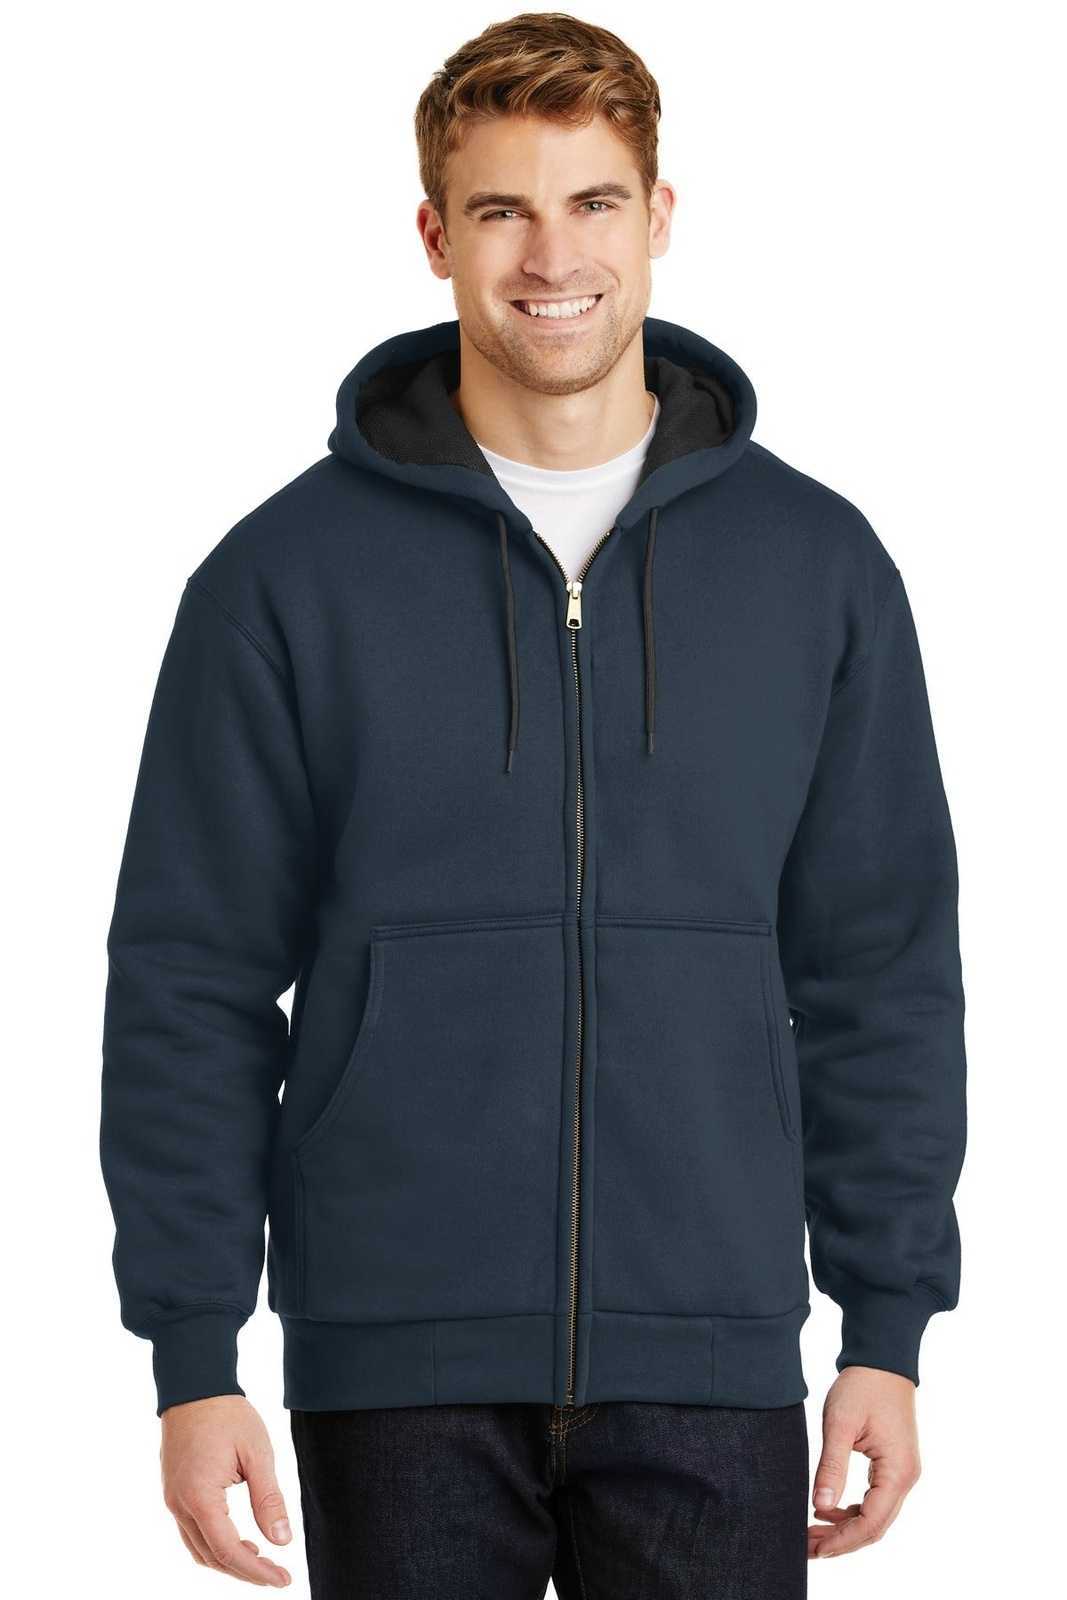 CornerStone CS620 Heavyweight Full-Zip Hooded Sweatshirt with Thermal Lining - Navy - HIT a Double - 1